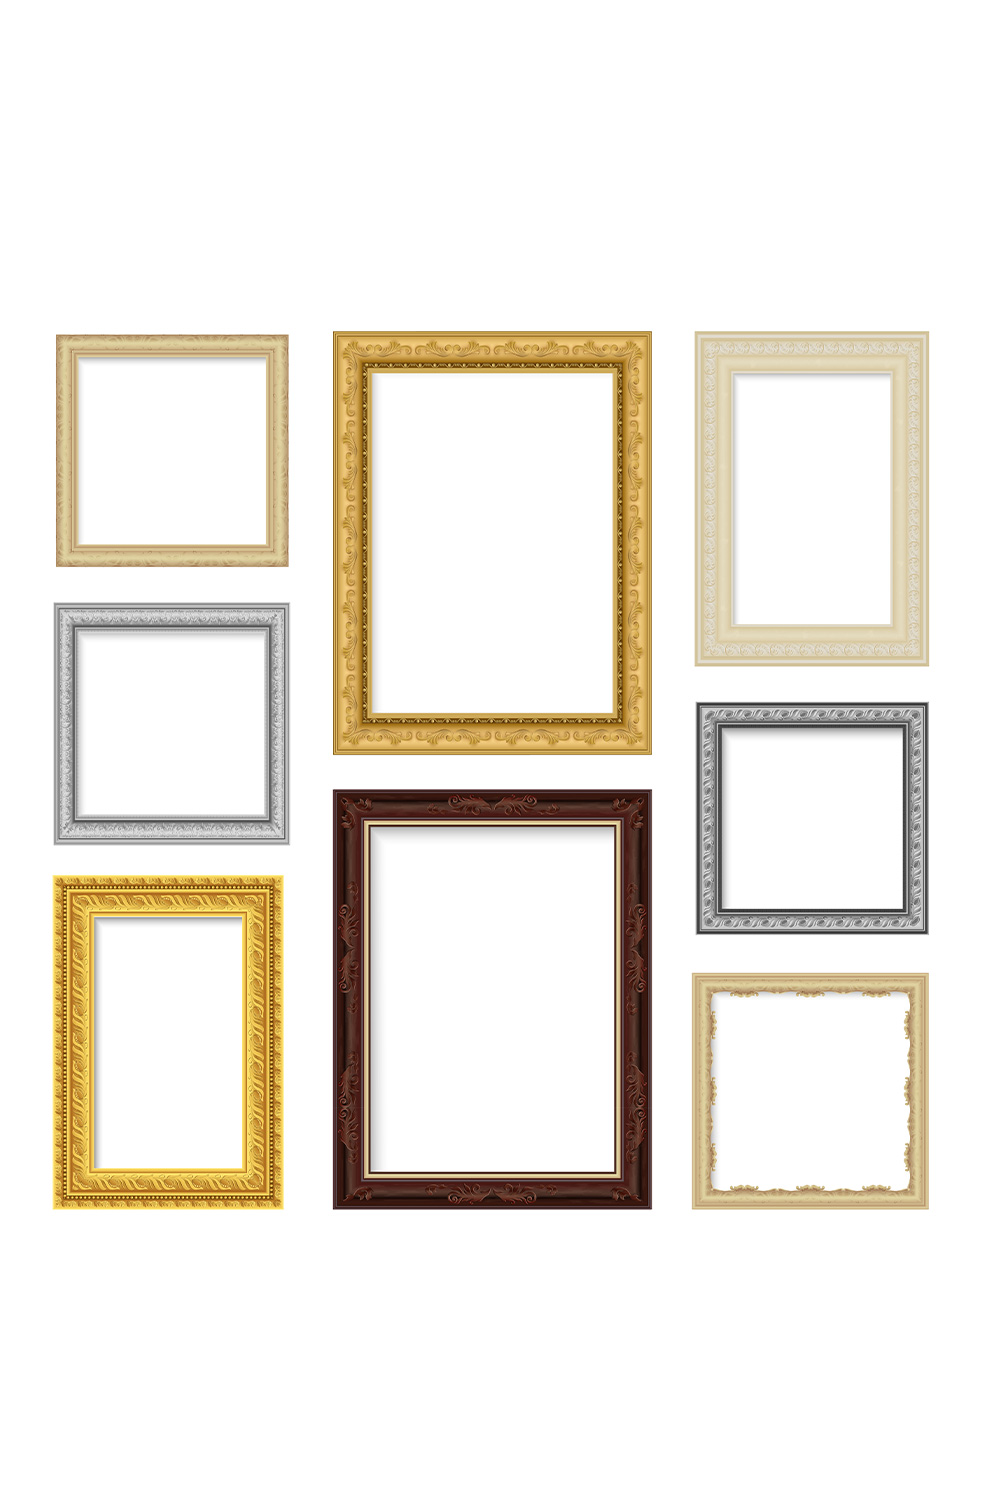 Photo frame in best looking frame pinterest preview image.